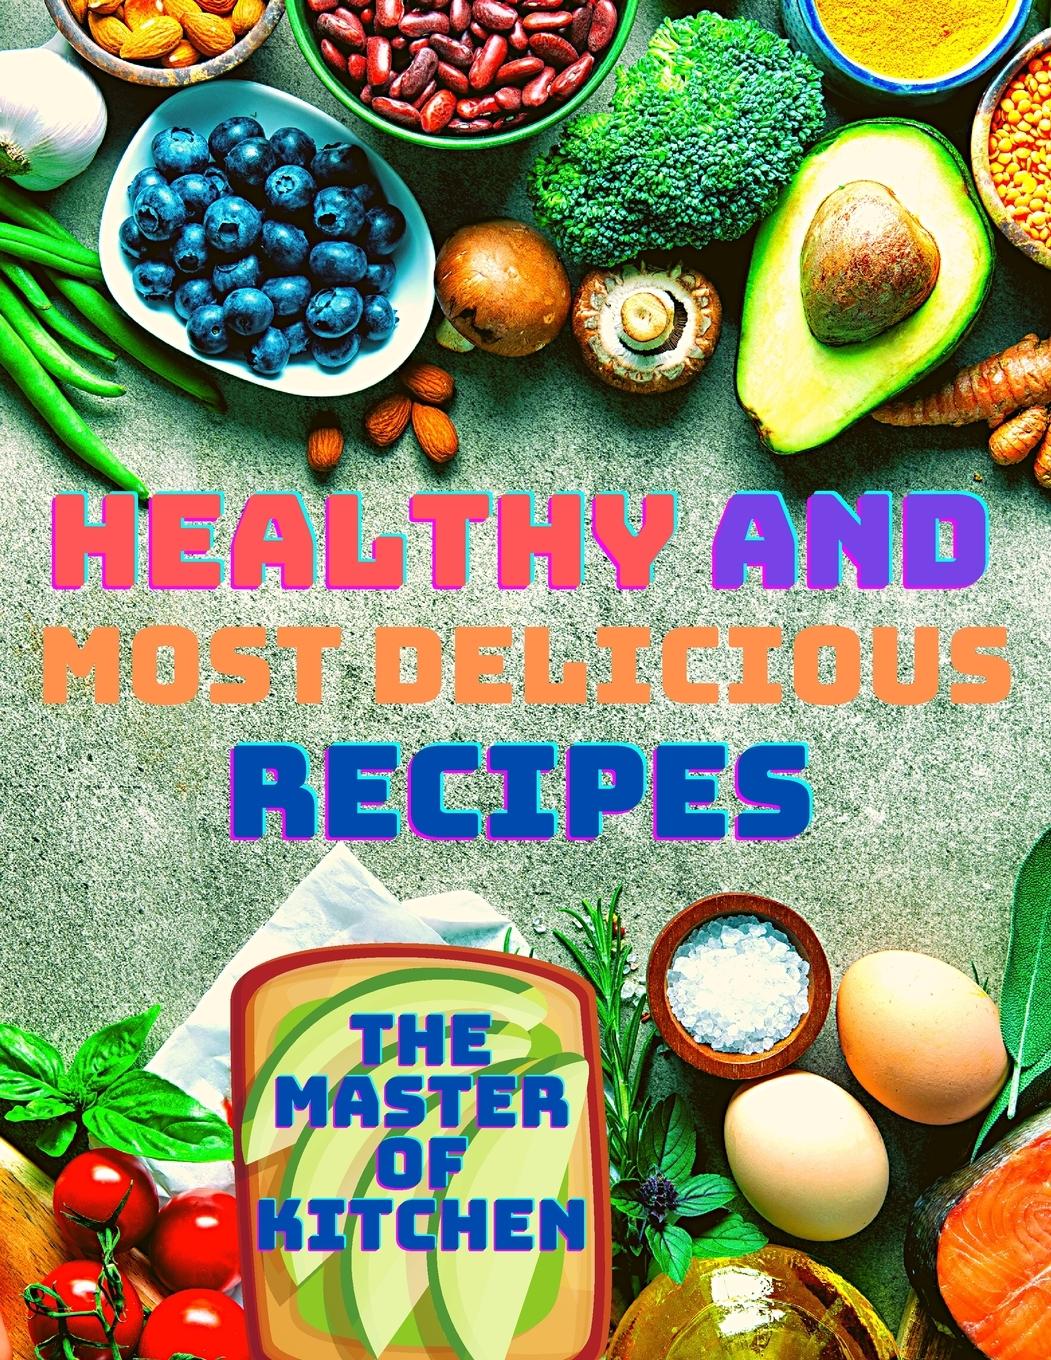 Healthy and Most Delicious Recipes / Sorens Books / Taschenbuch / Paperback / Englisch / 2021 / Intell World Publishers / EAN 9781803896106 - Sorens Books